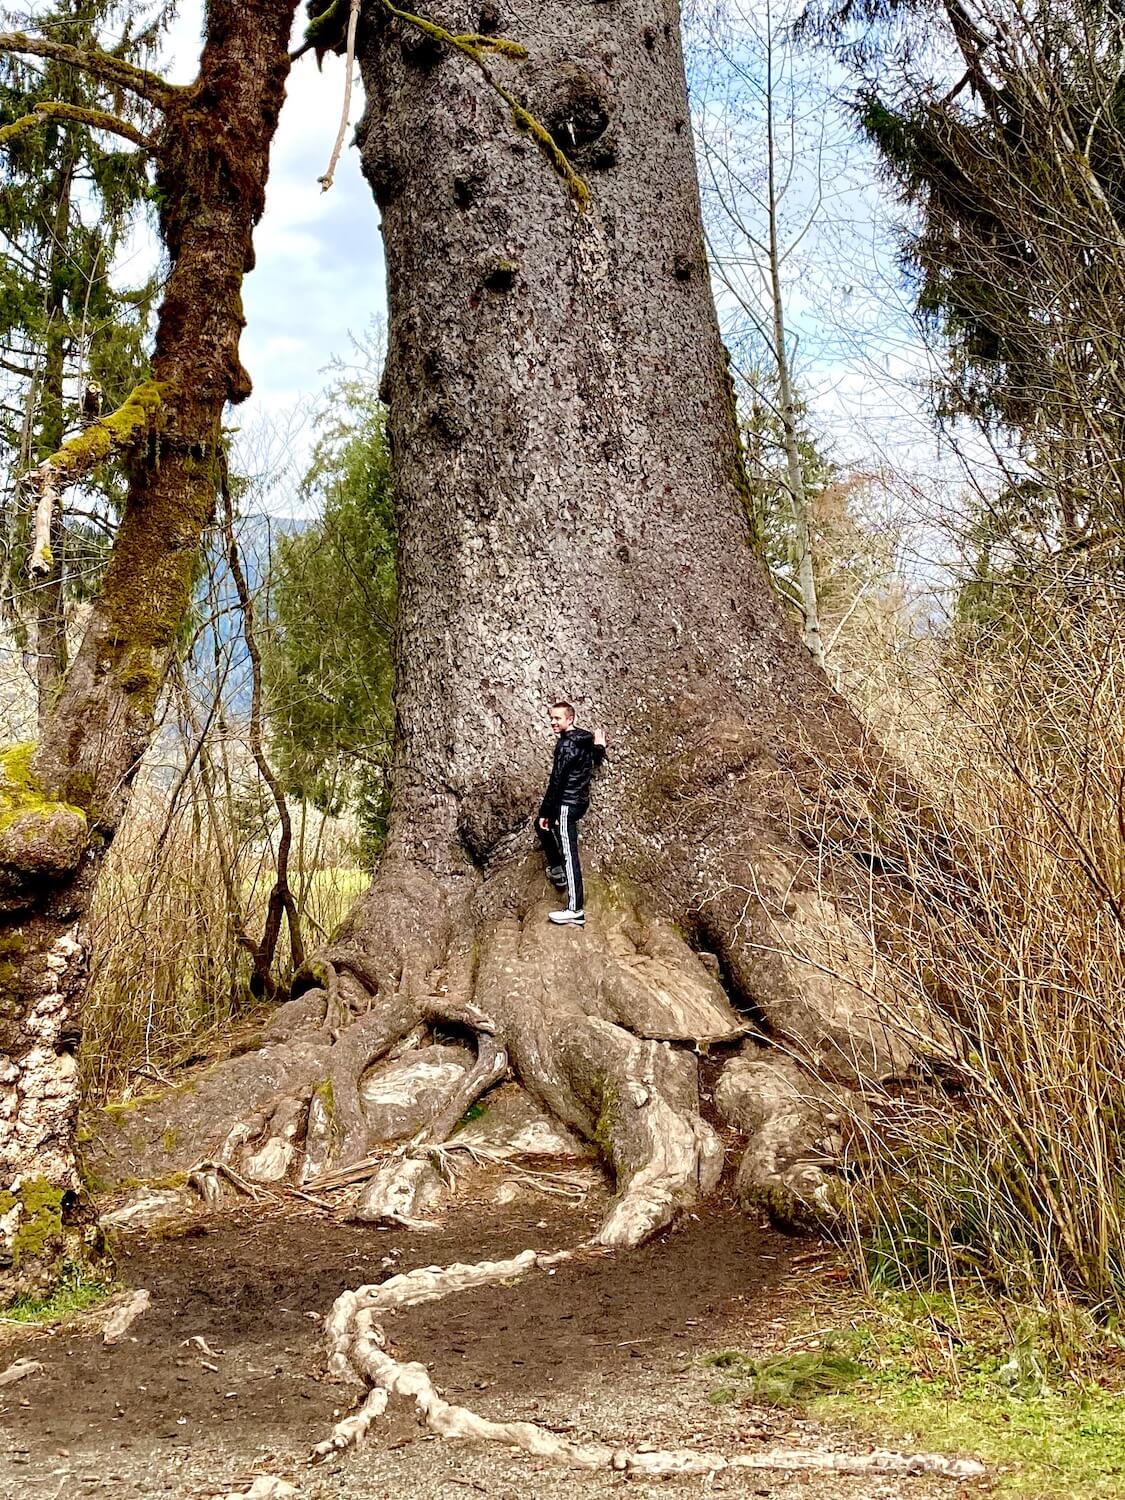 A man stands on the root base of the largest Sitka Spruce tree in the world. He is dwarfed by the massive size of the tree, with winding roots and textures bark.